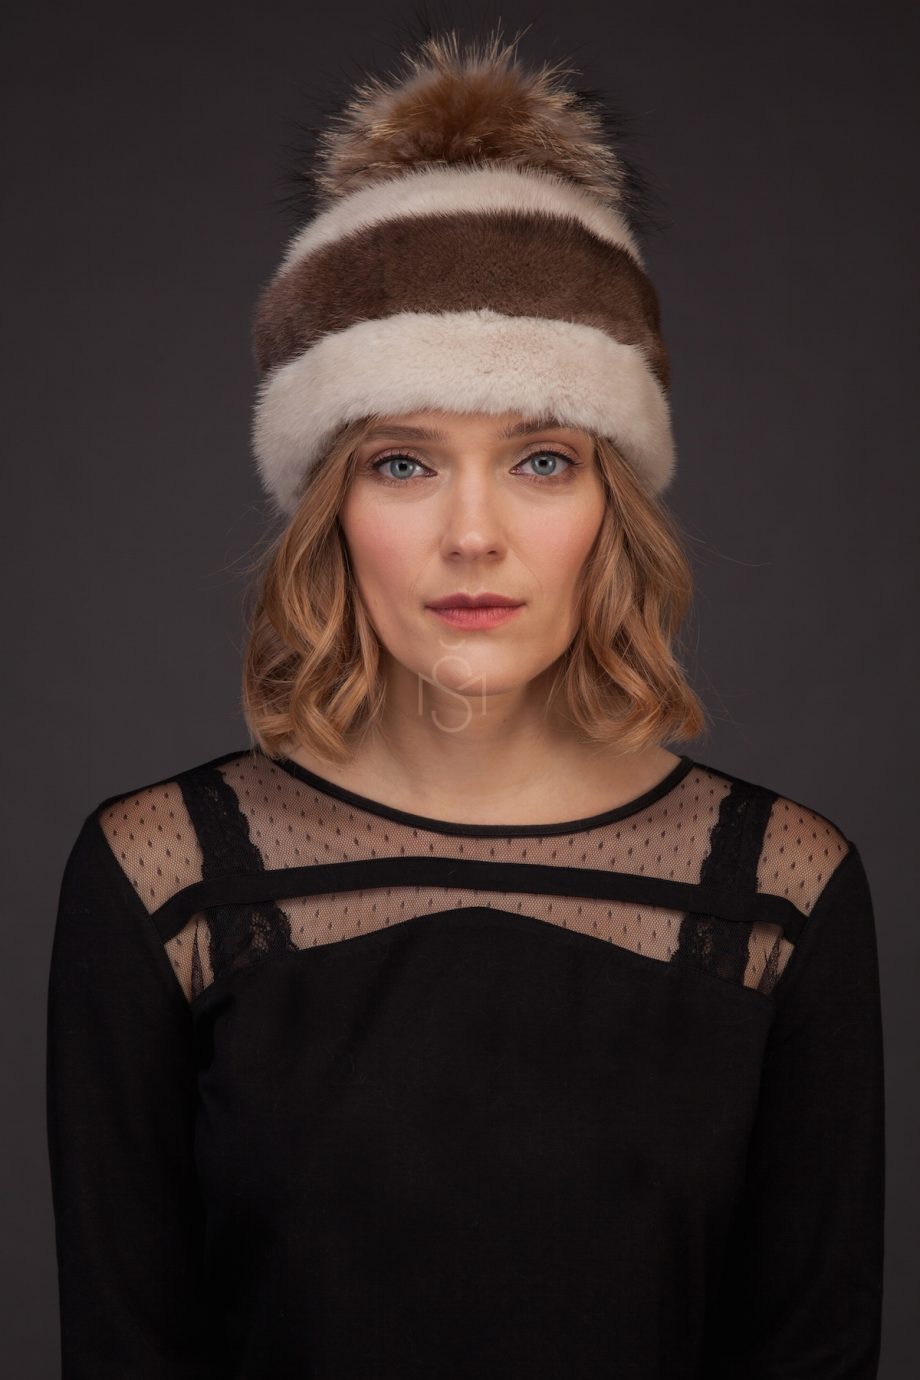 Combined mink fur hat with pom-pom and leather inserts made by SILTA MADA fur studio in Vilnius